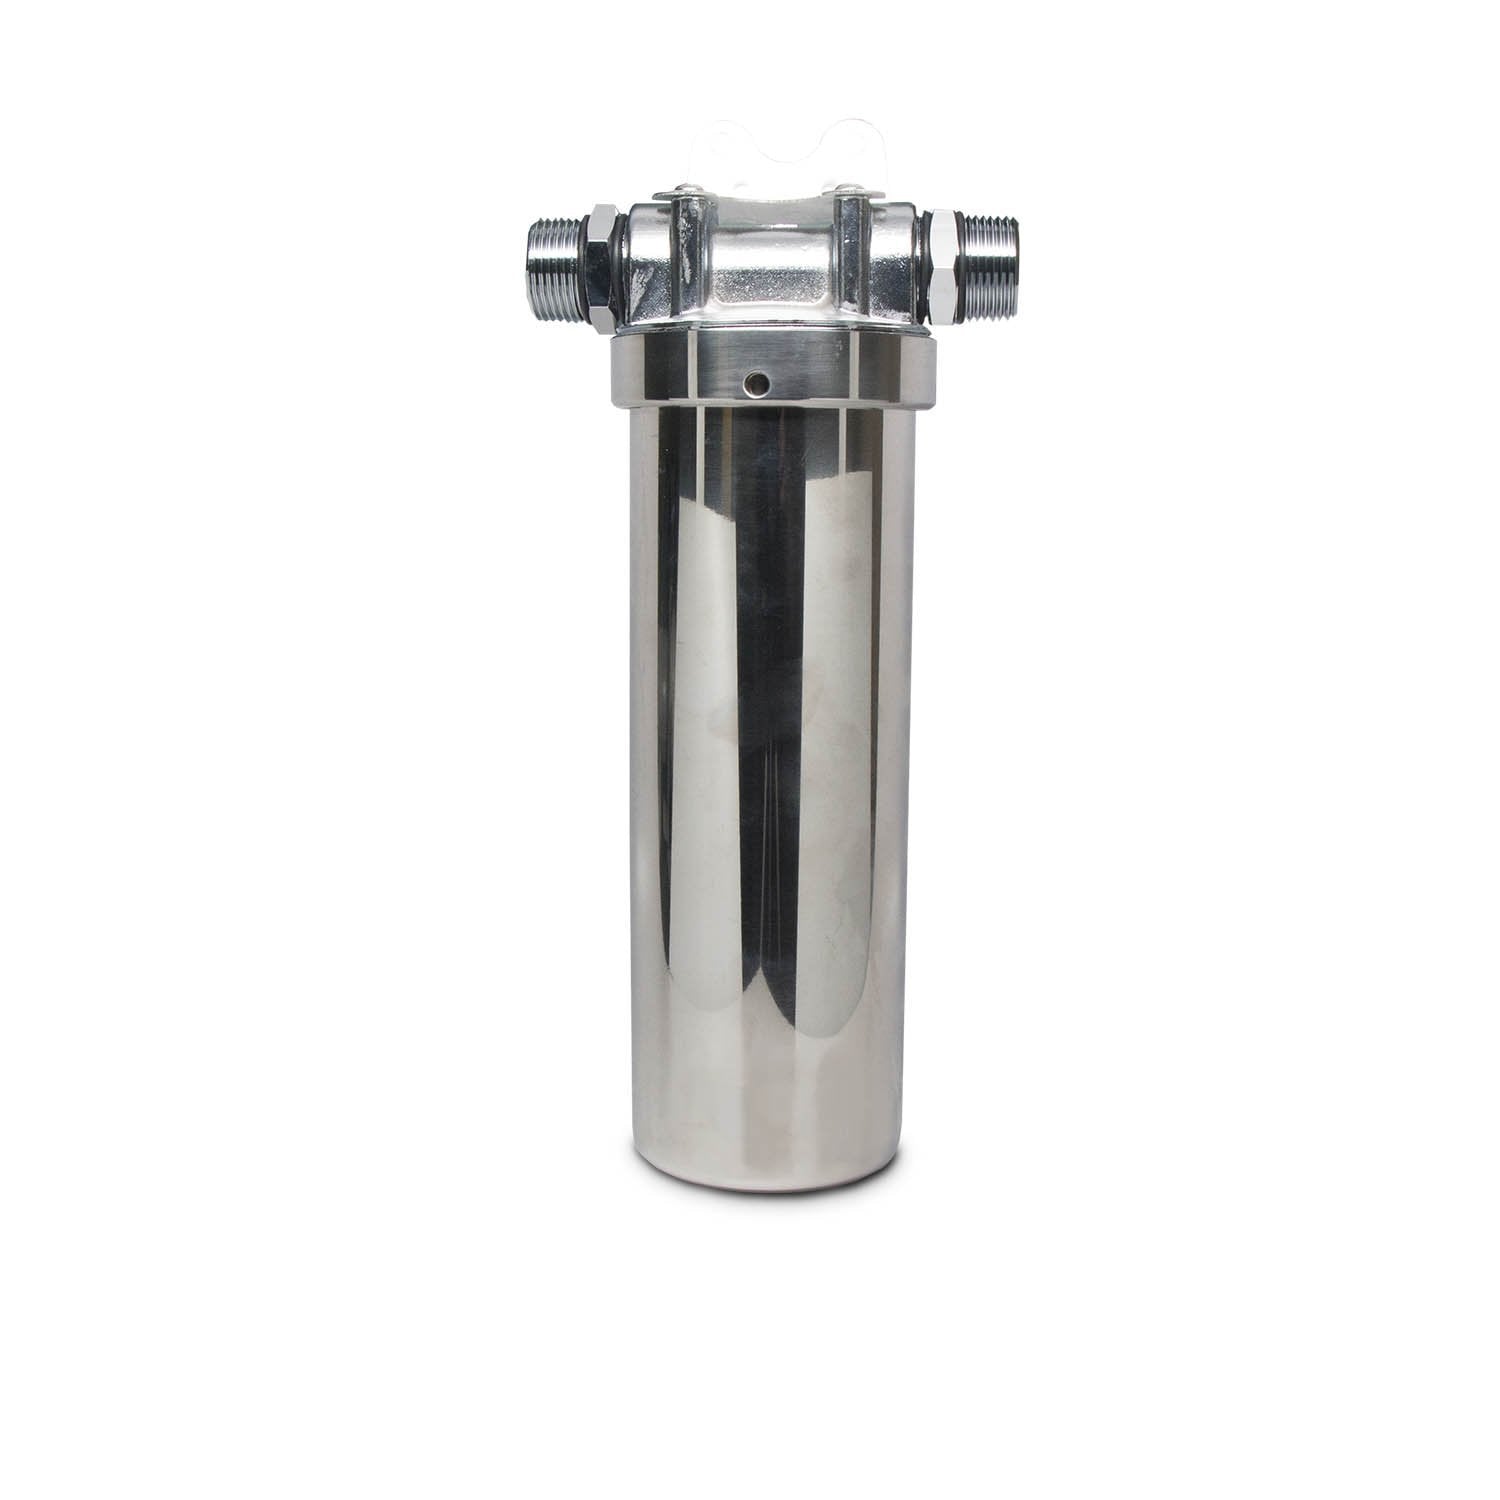 Crystal Quest, 2.5" x 10" Stainless Steel Sump and Cap Assembly